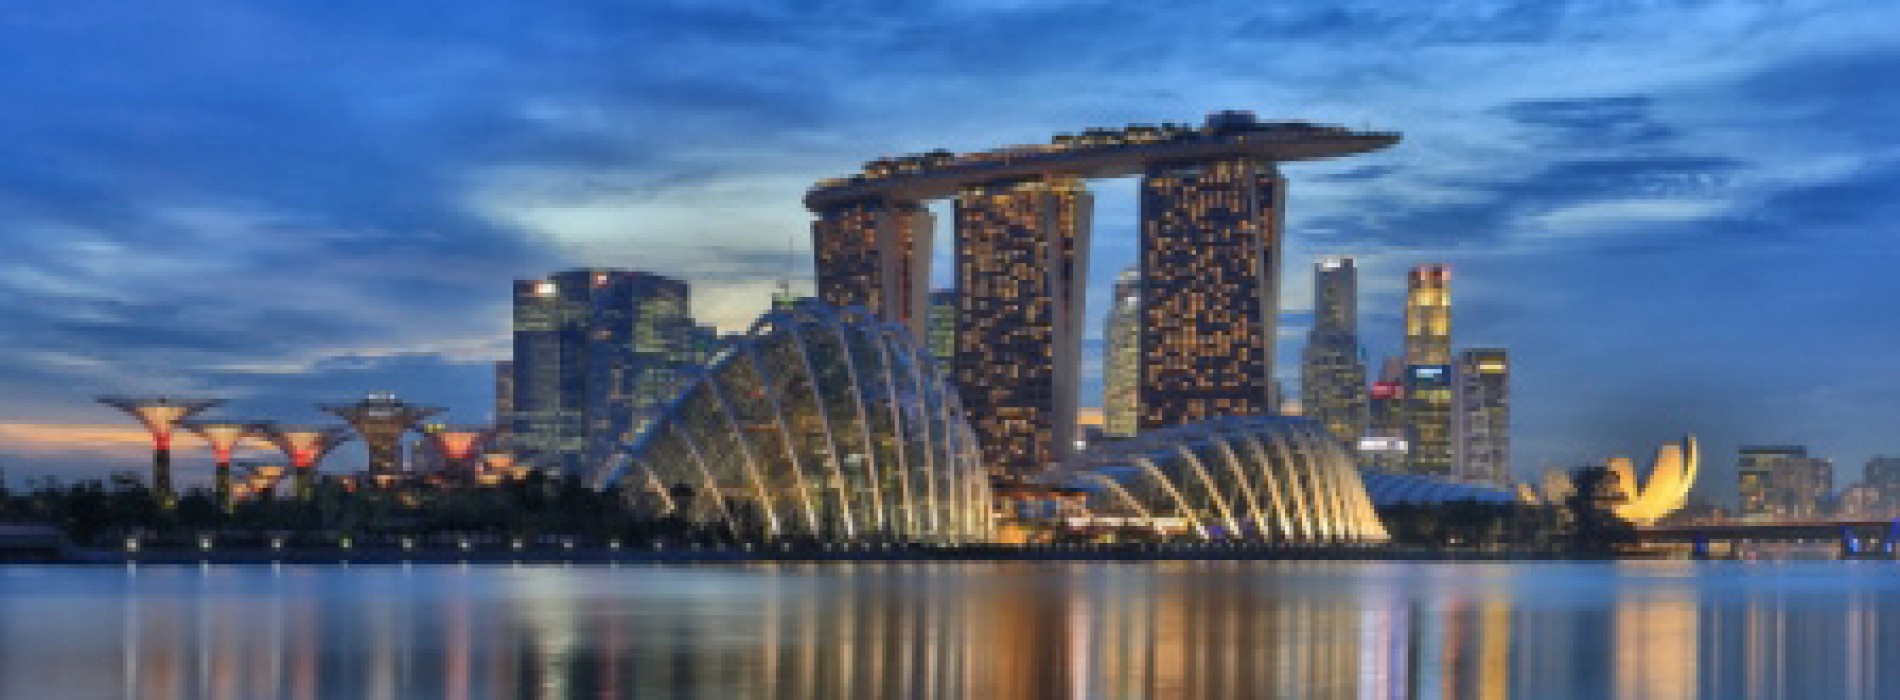 Singapore welcomes 6.1 lakh visitors from India between Jan-May 2018